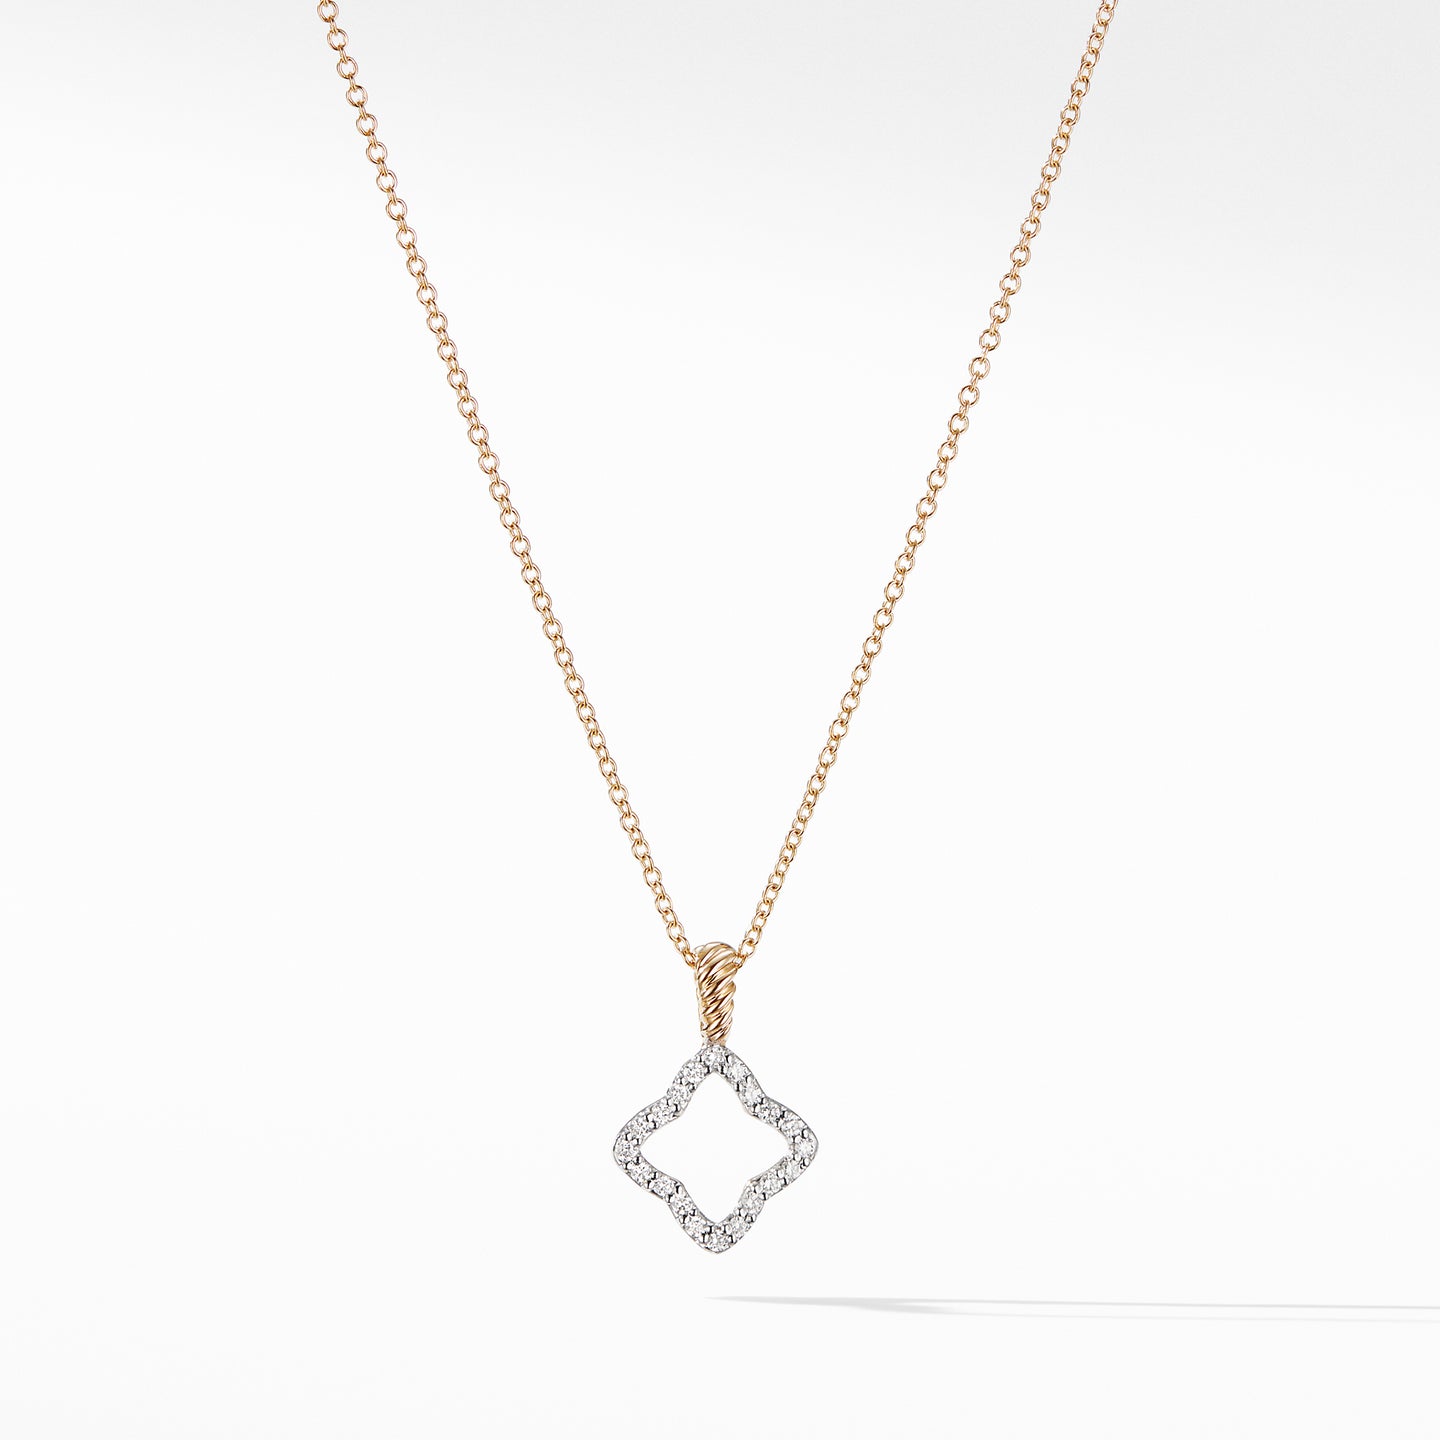 Cable Collectibles® Quatrefoil Pendant Necklace with Diamonds in 18K Gold